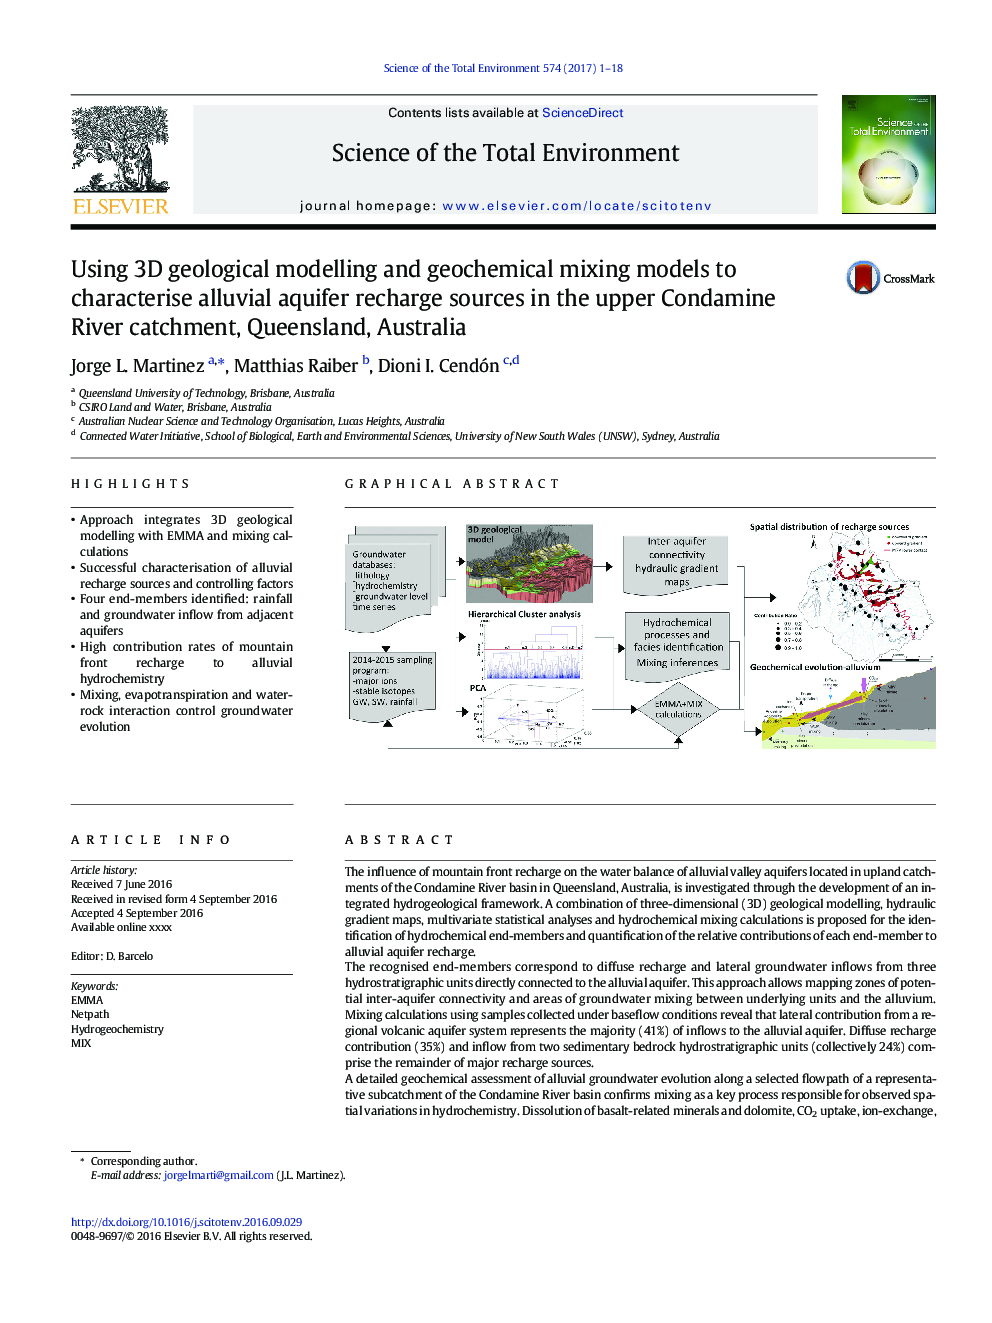 Using 3D geological modelling and geochemical mixing models to characterise alluvial aquifer recharge sources in the upper Condamine River catchment, Queensland, Australia